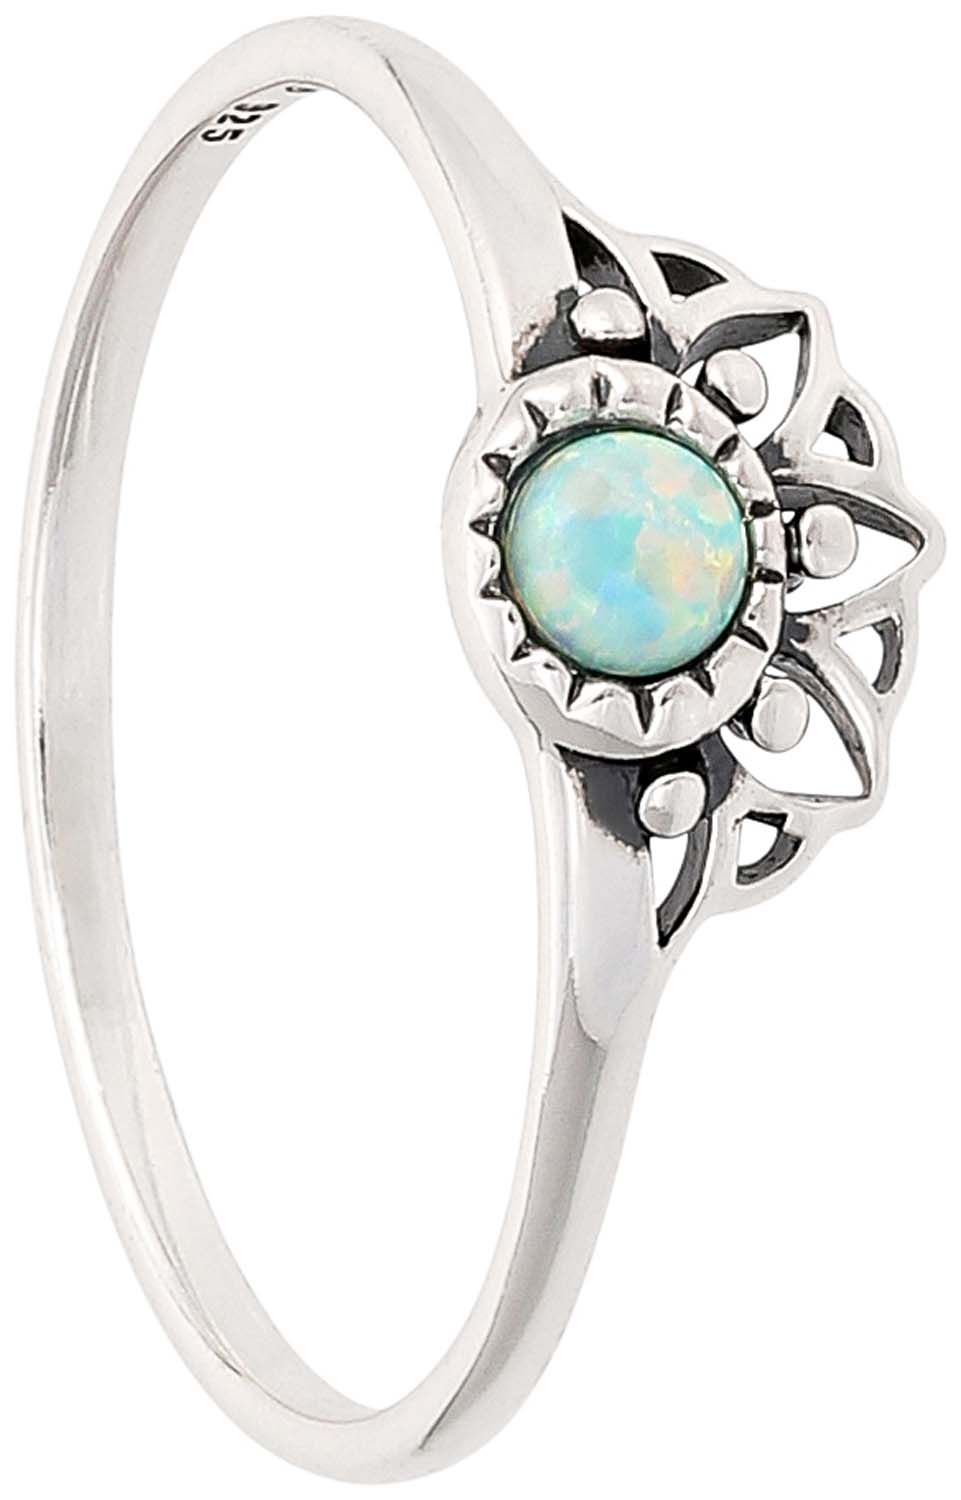 Ring - Turquoise Opal